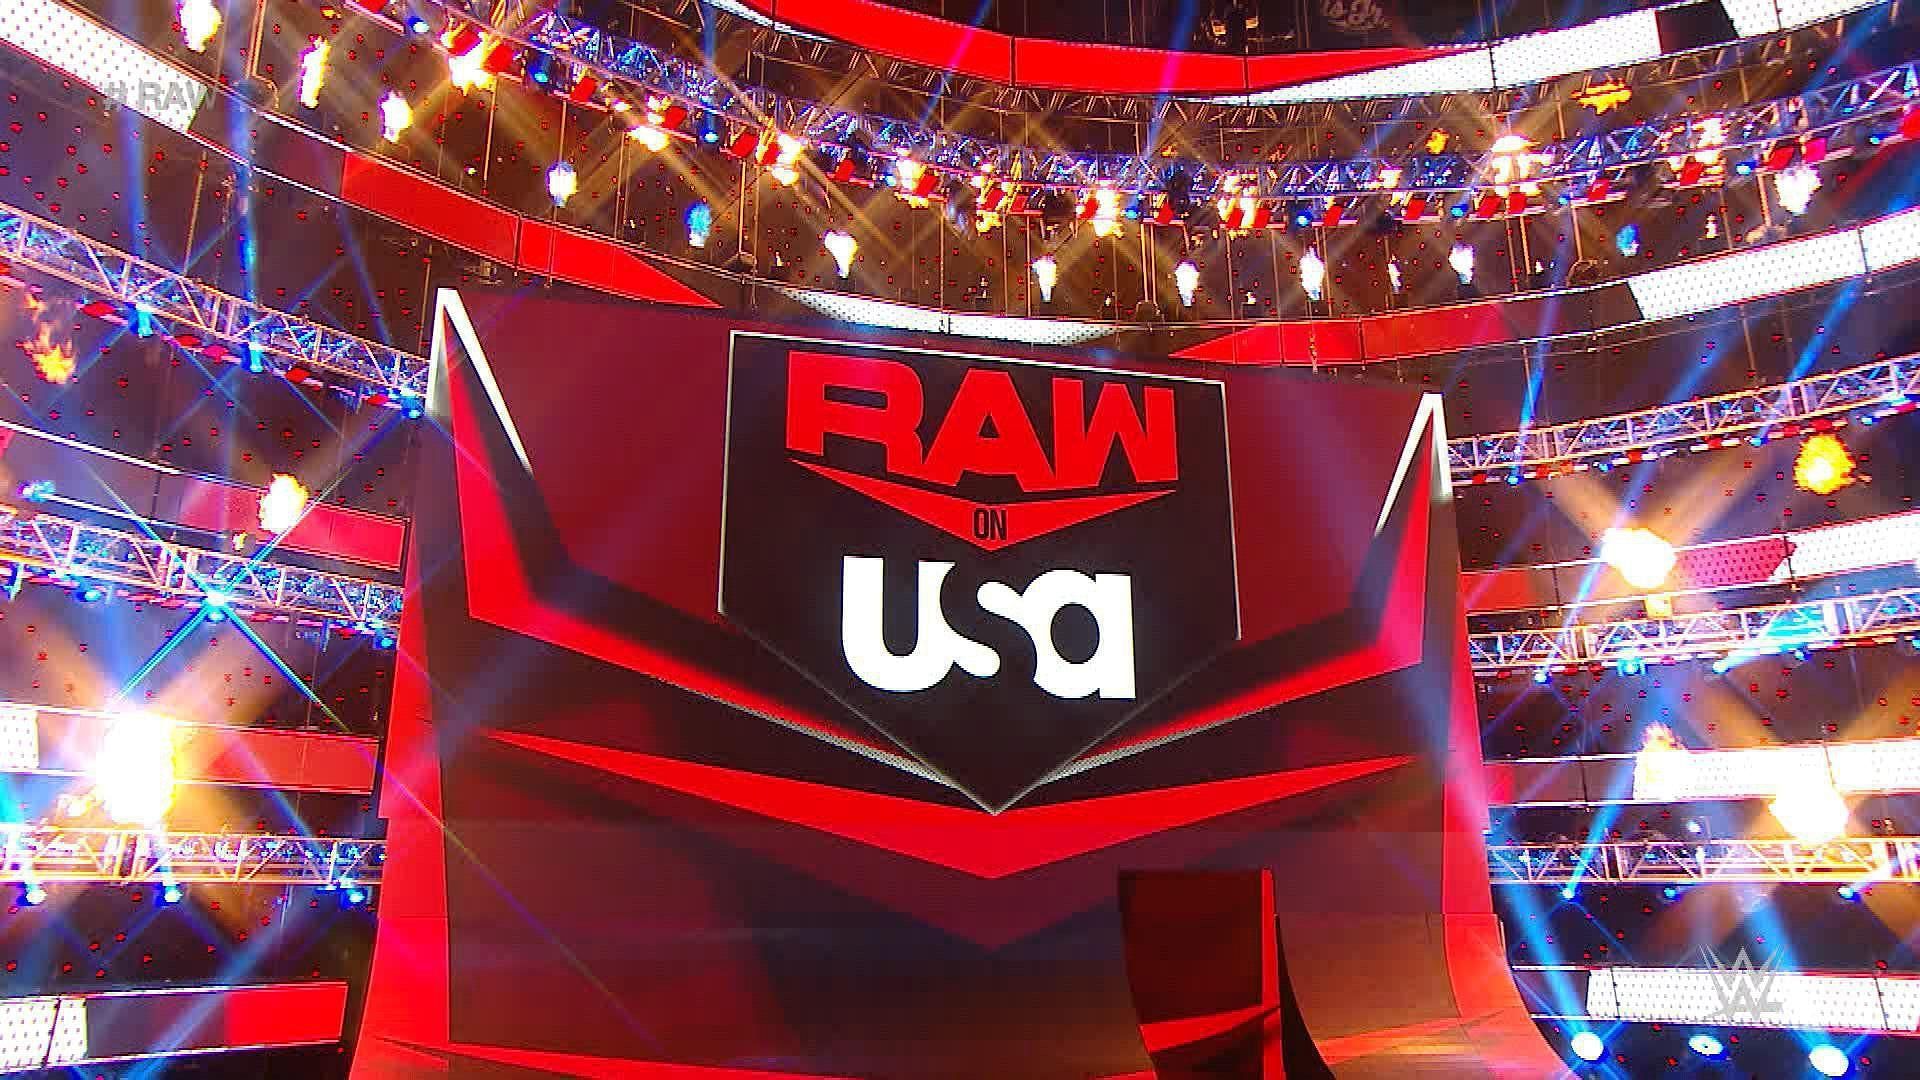 The official logos for WWE RAW on the USA Network